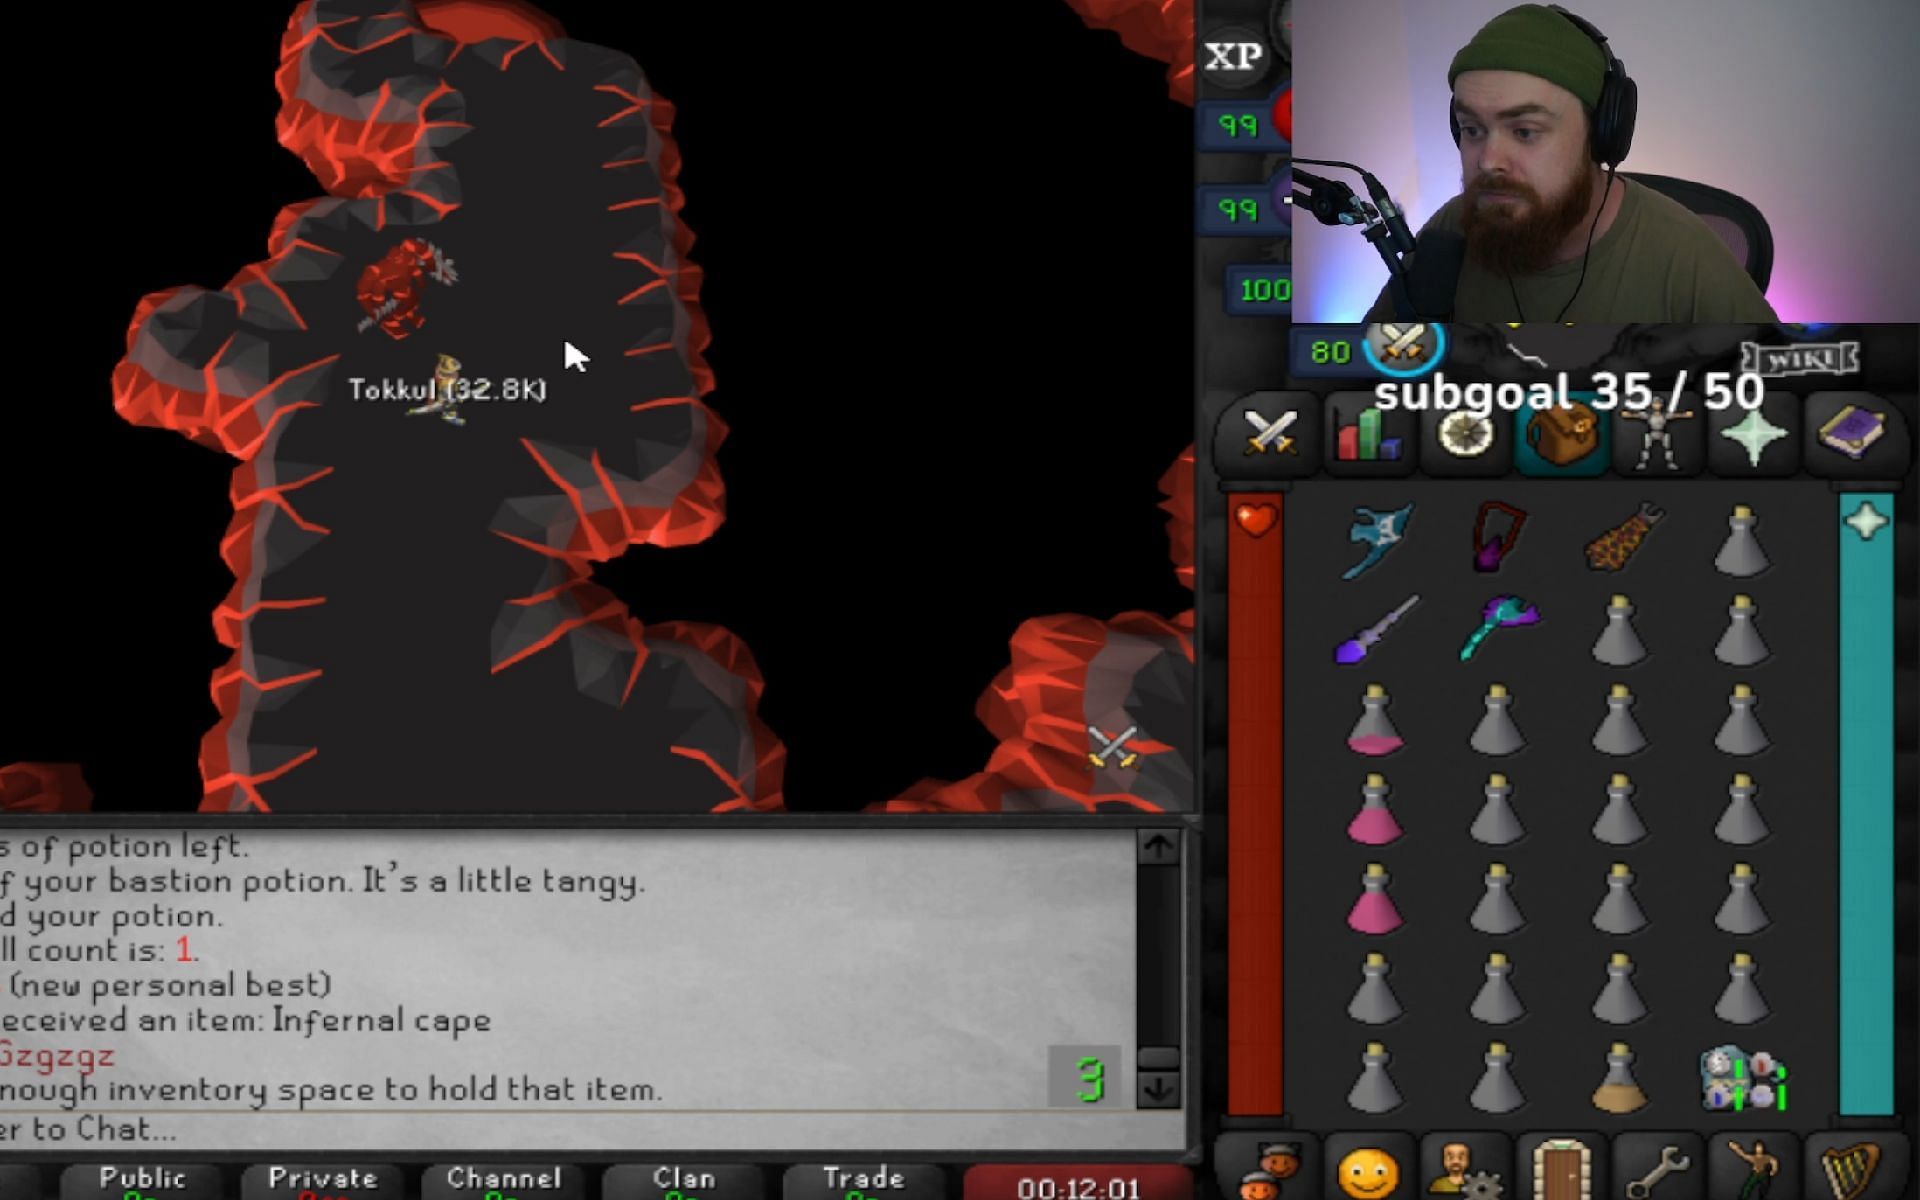 Twitch streamer GingerBeardie faints after defeating a challenging boss in Old School RuneScape (Image via GingerBeardie/Twitch)